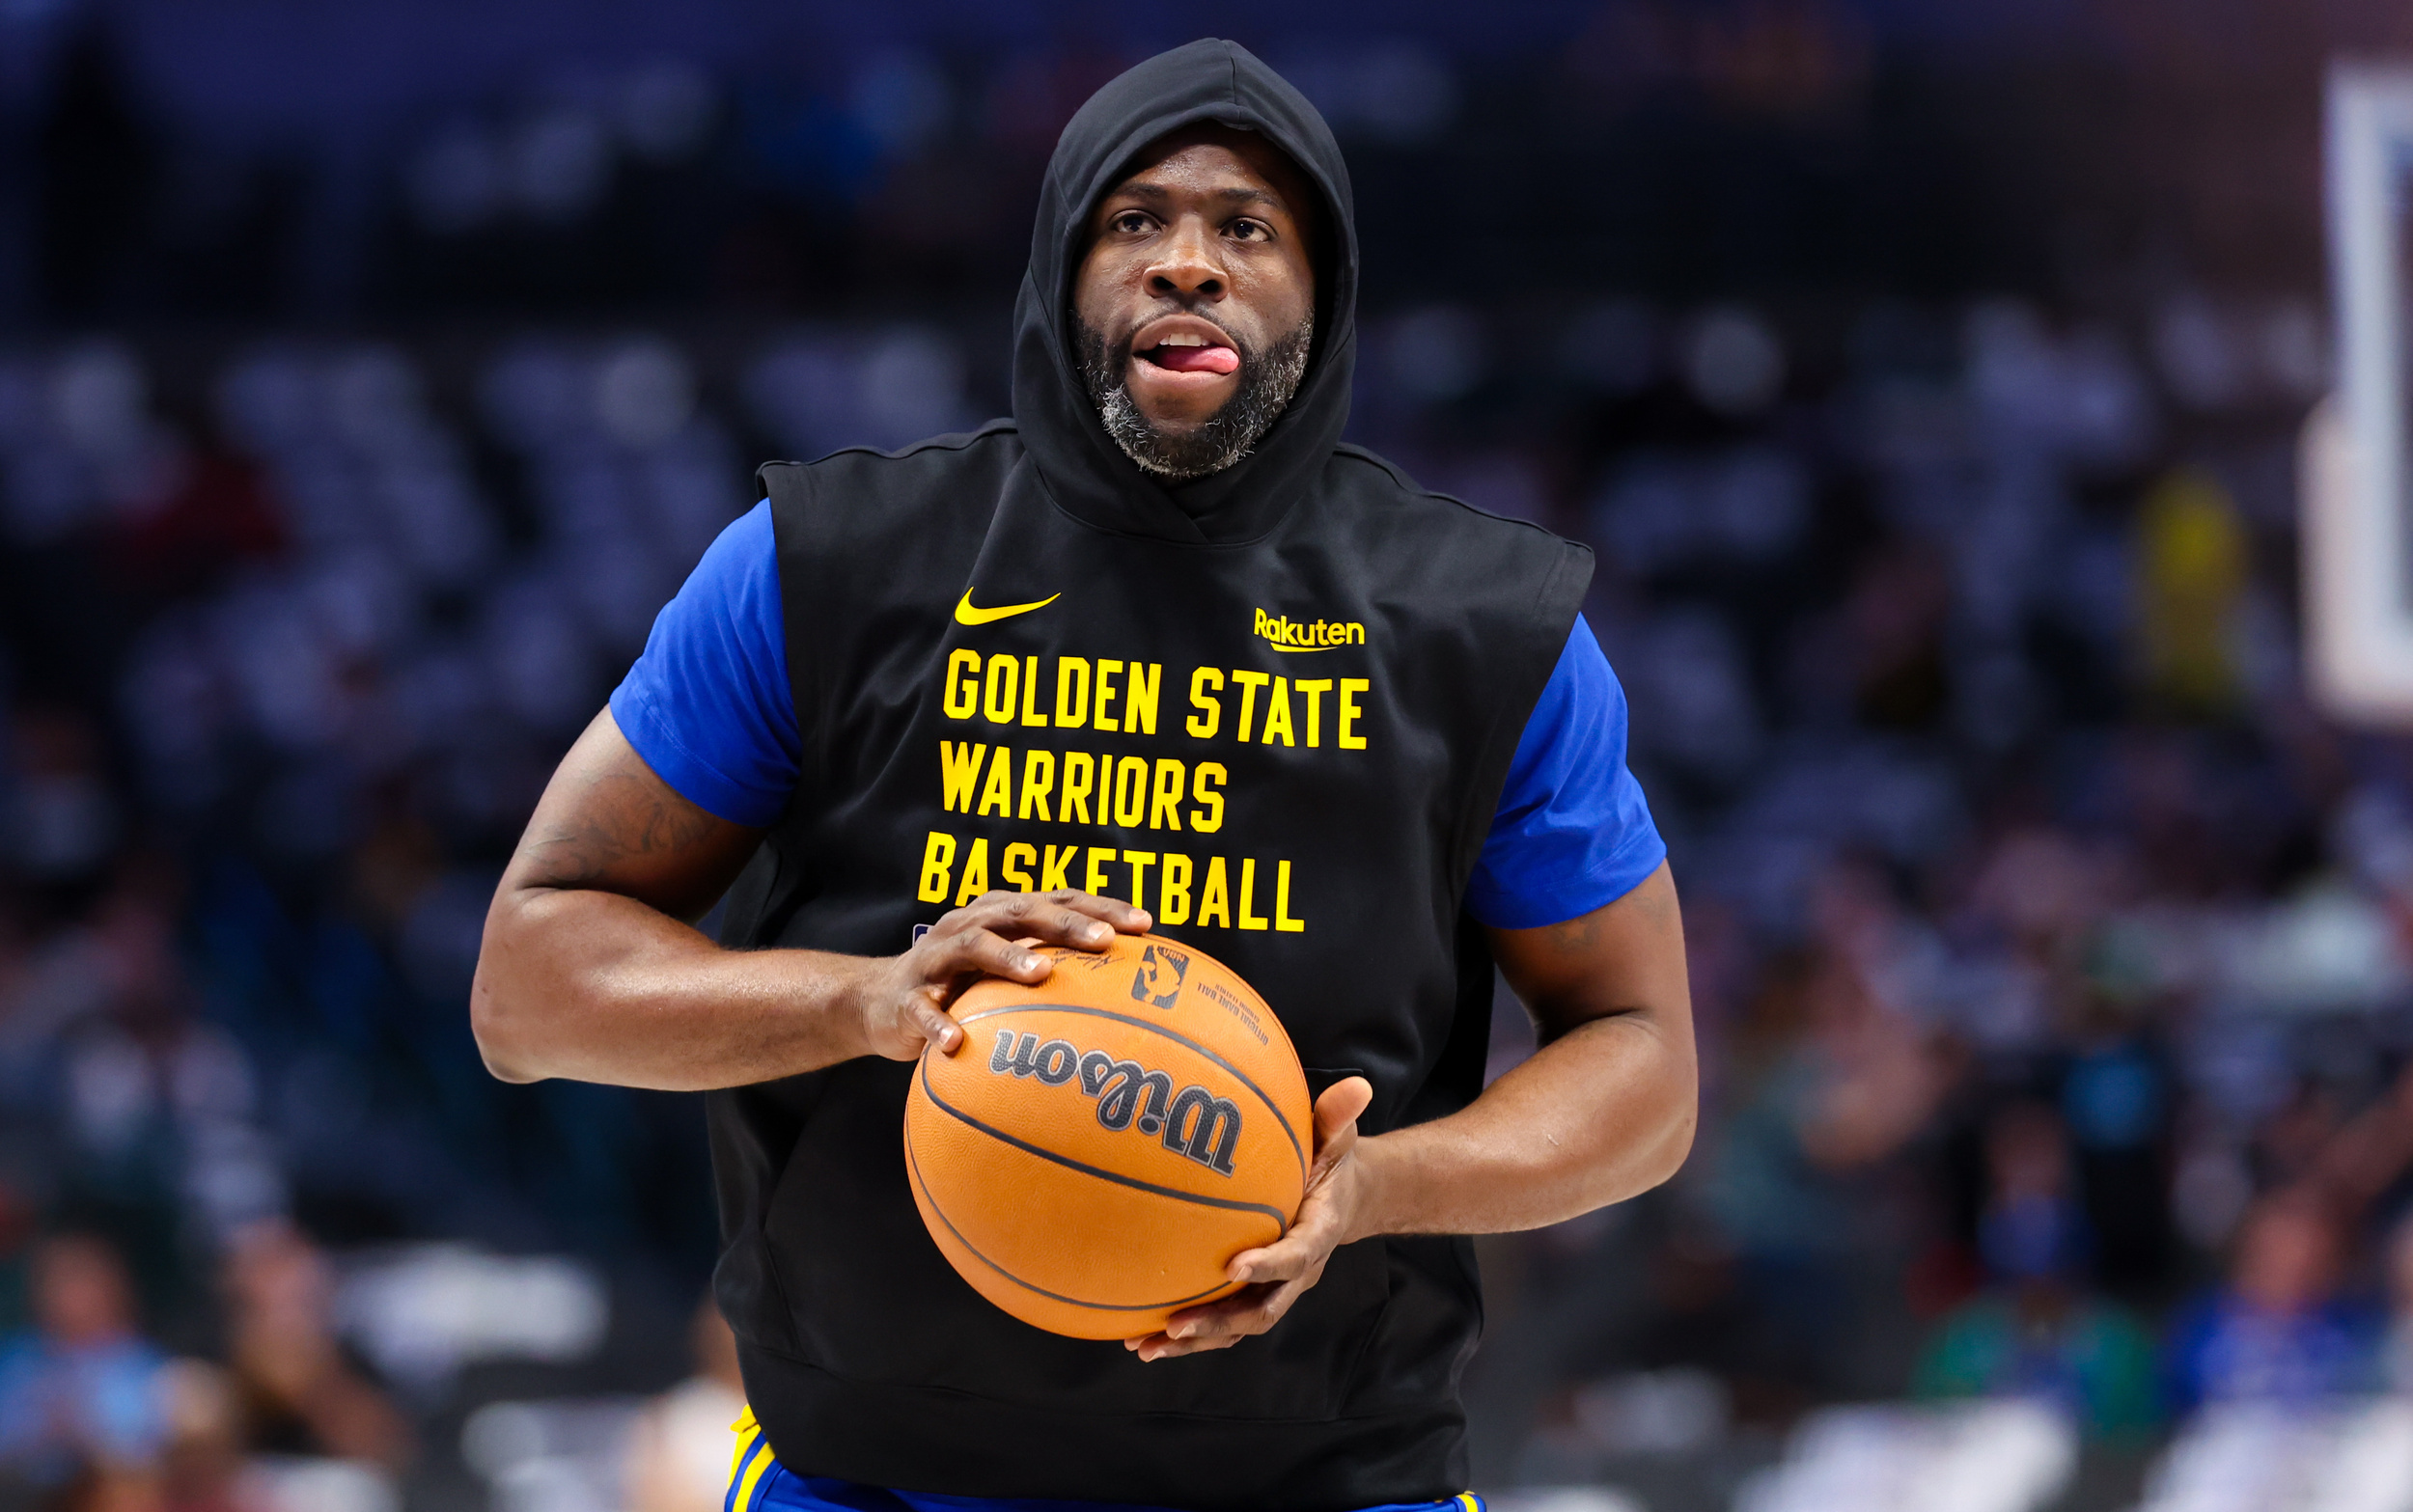 draymond green has strong response to point guard debate